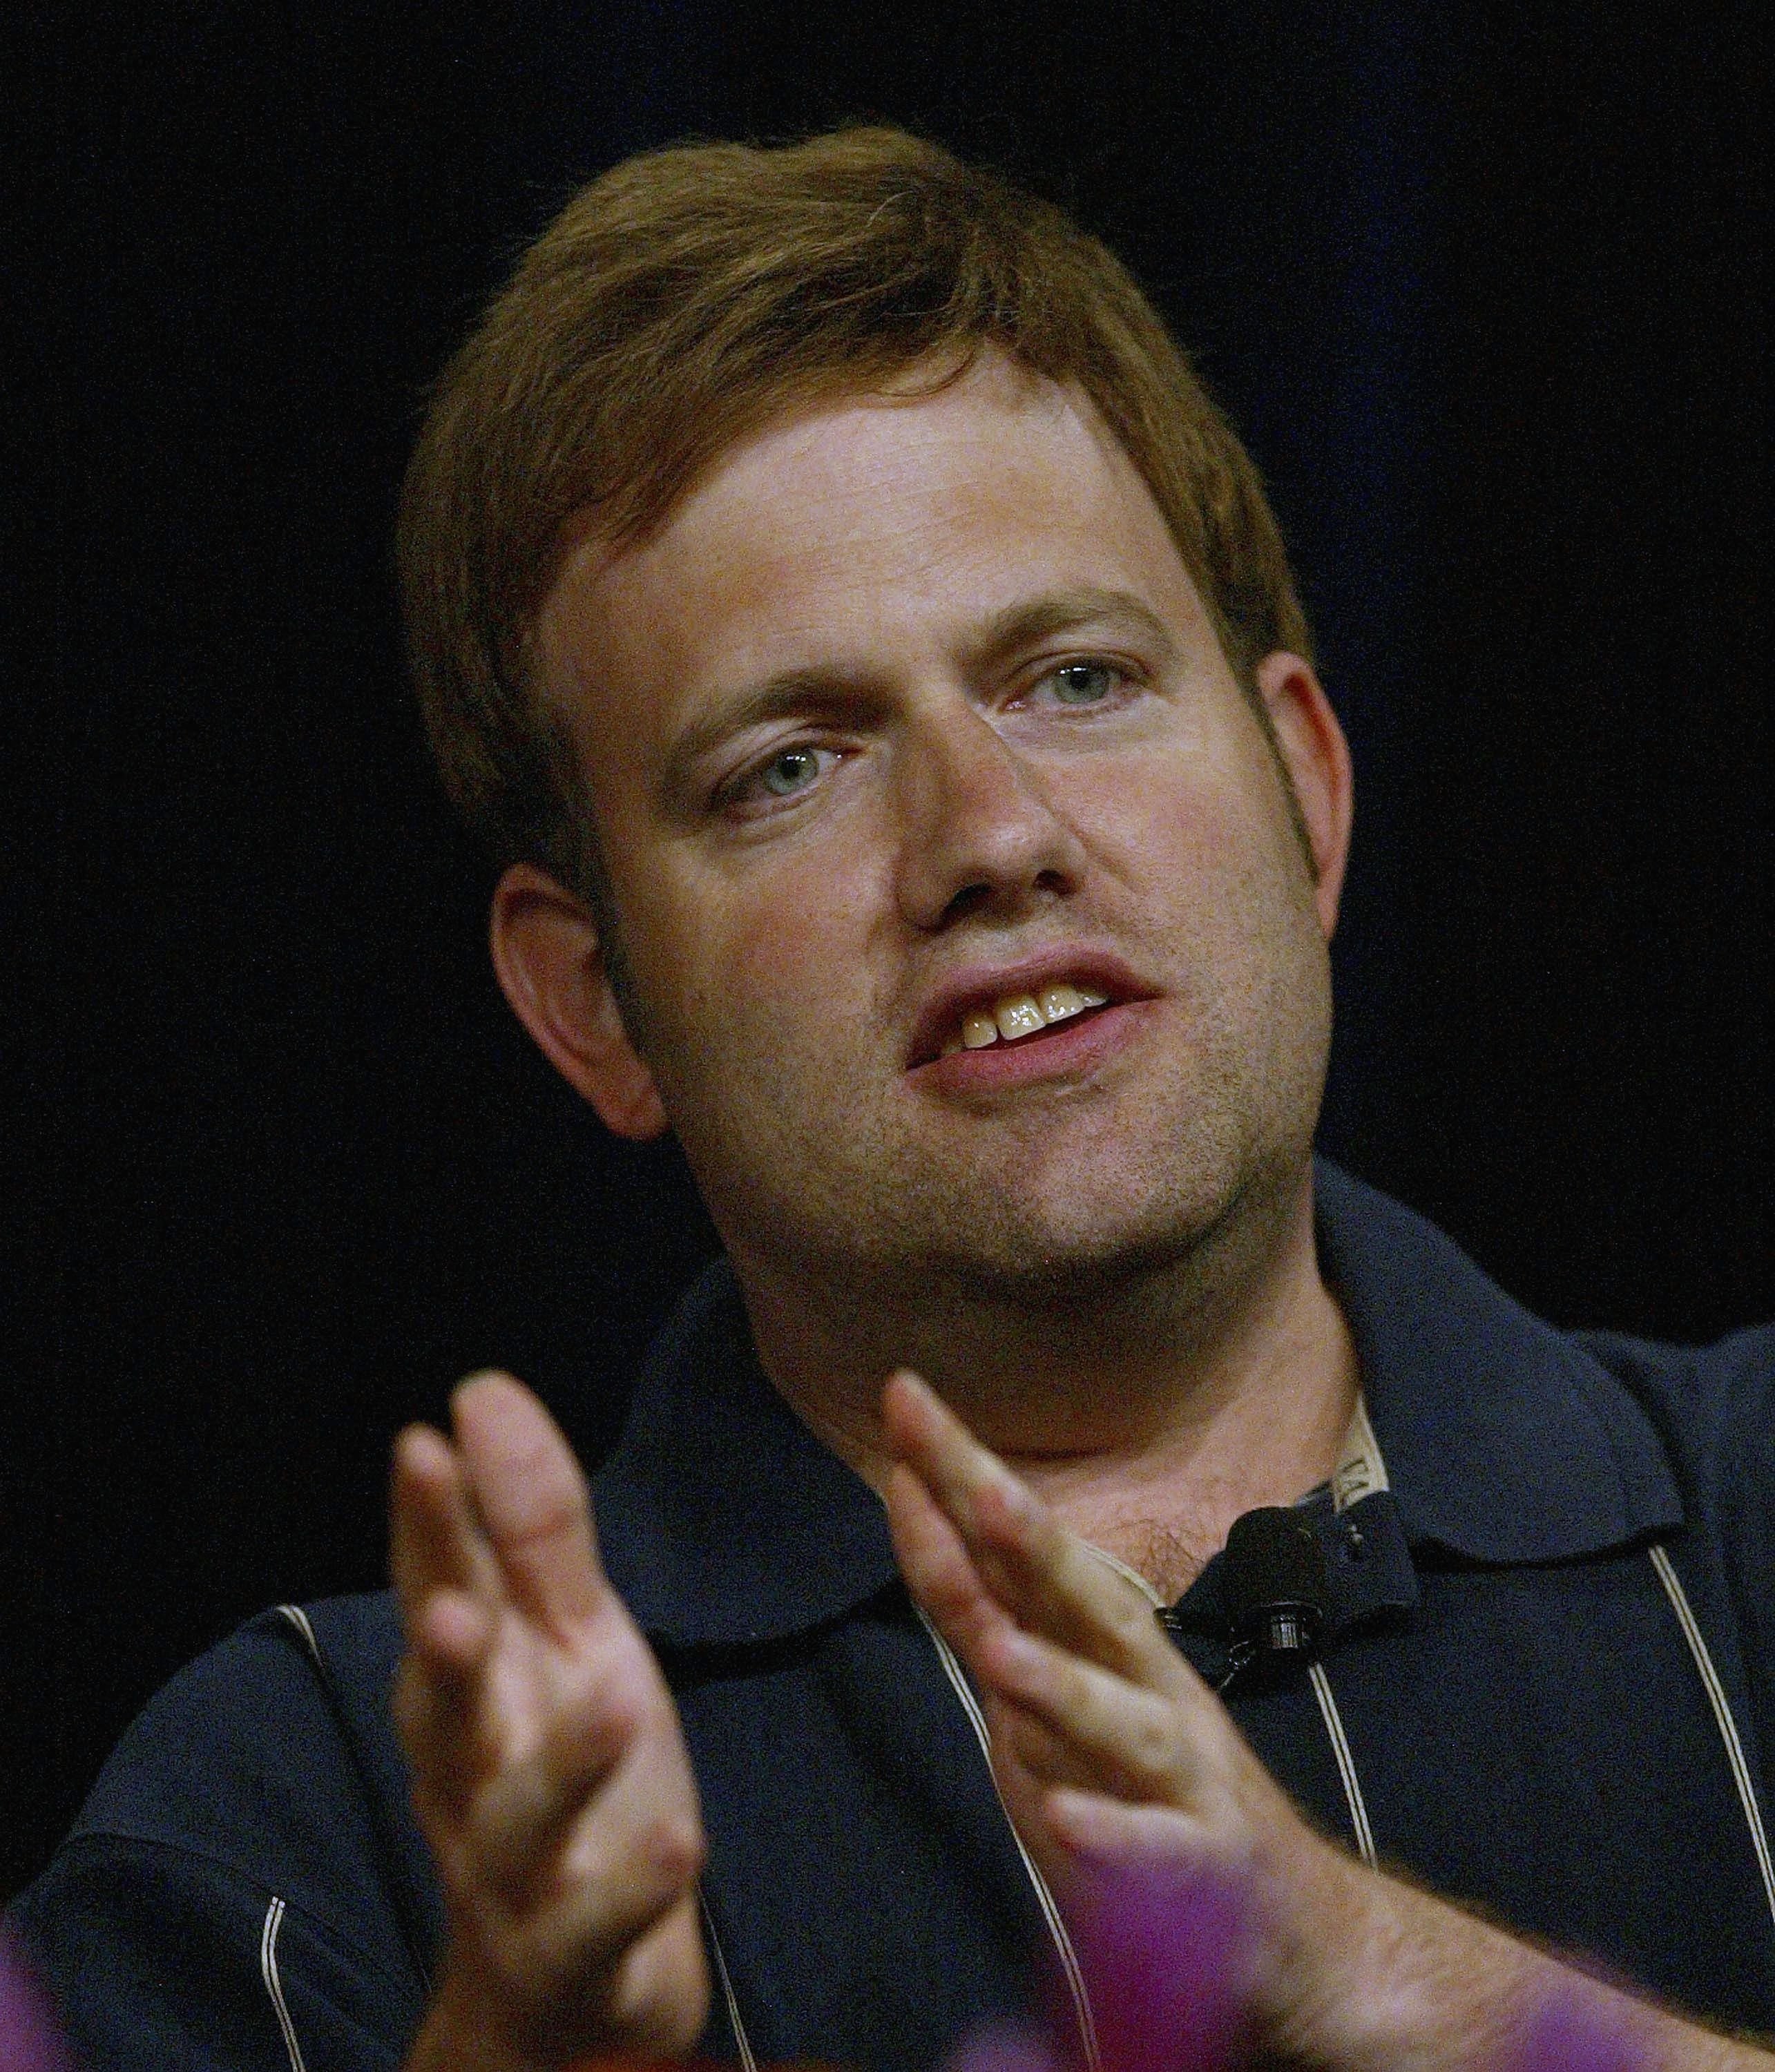 Frank Luntz spoke at the Television Critics Association Press Tour at the Westin Century Plaza Hotel on July 8, 2004 | Photo: Getty Images